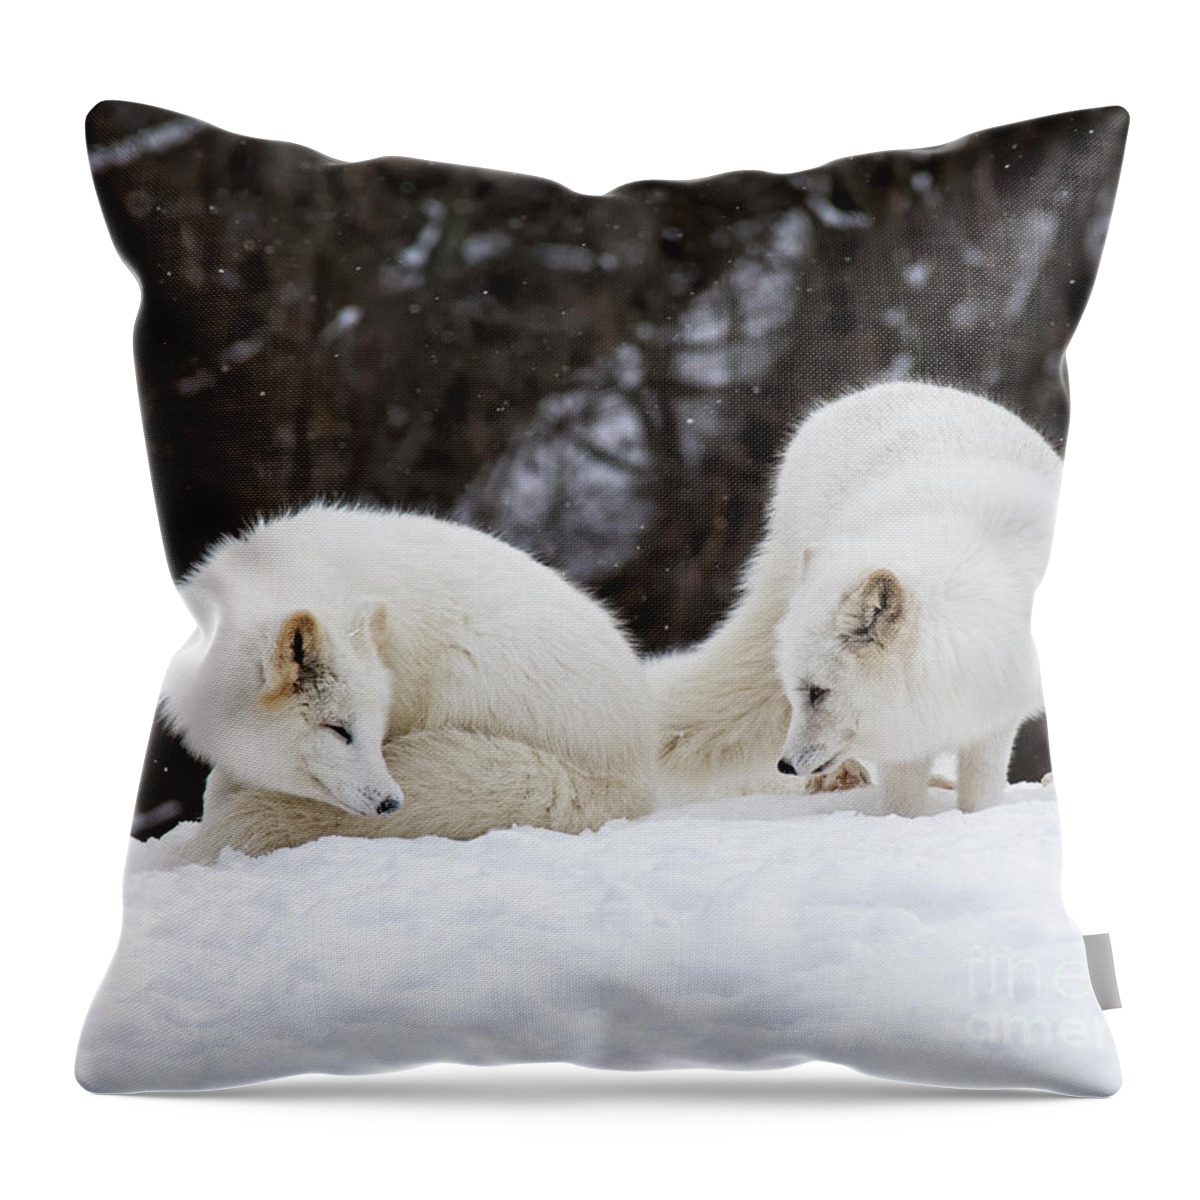 Nina Stavlund Throw Pillow featuring the photograph Sibling Love by Nina Stavlund